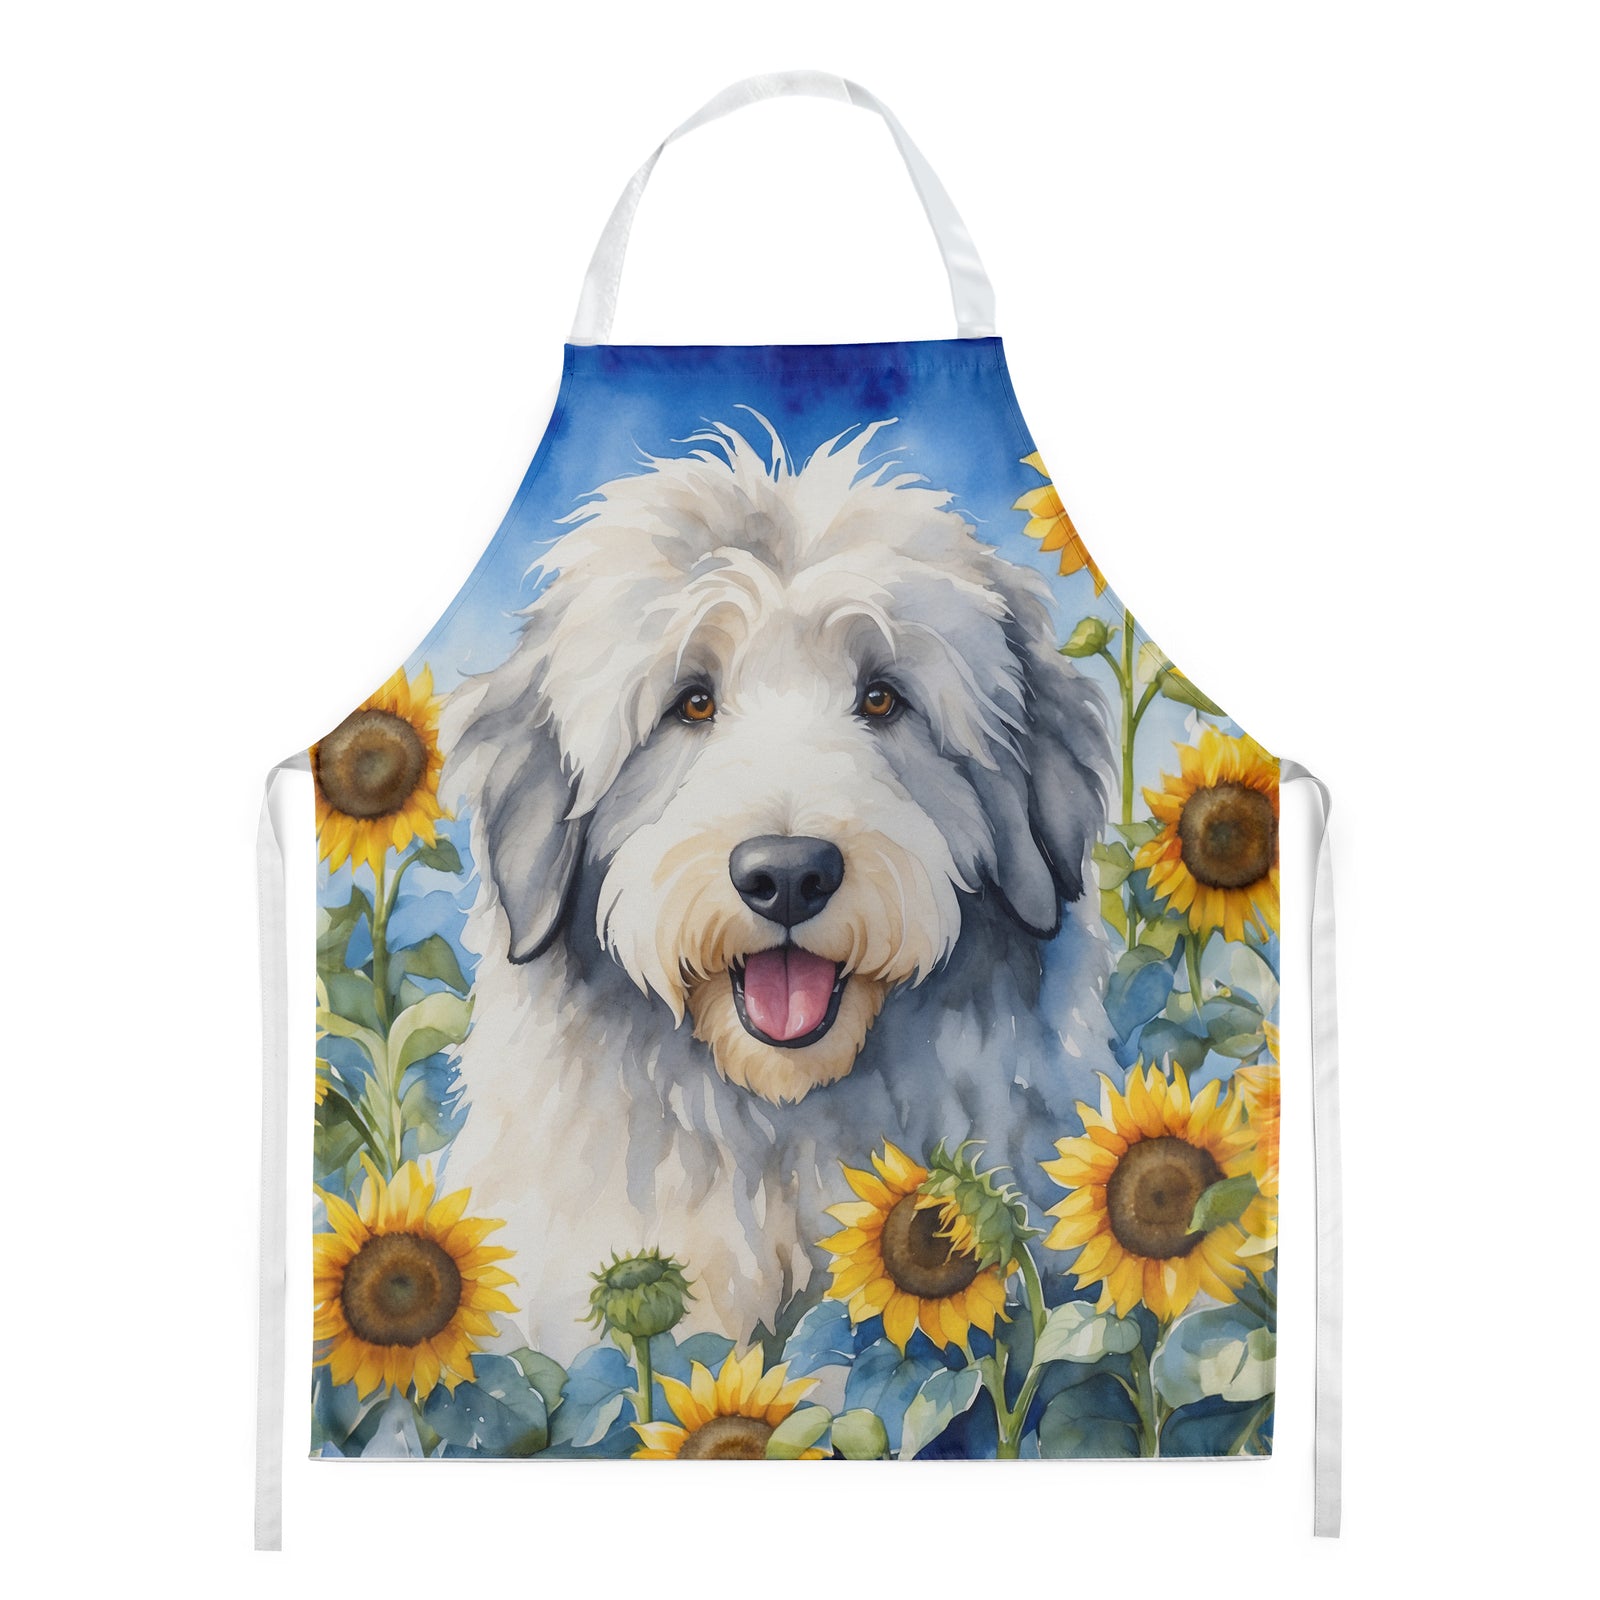 Buy this Old English Sheepdog in Sunflowers Apron